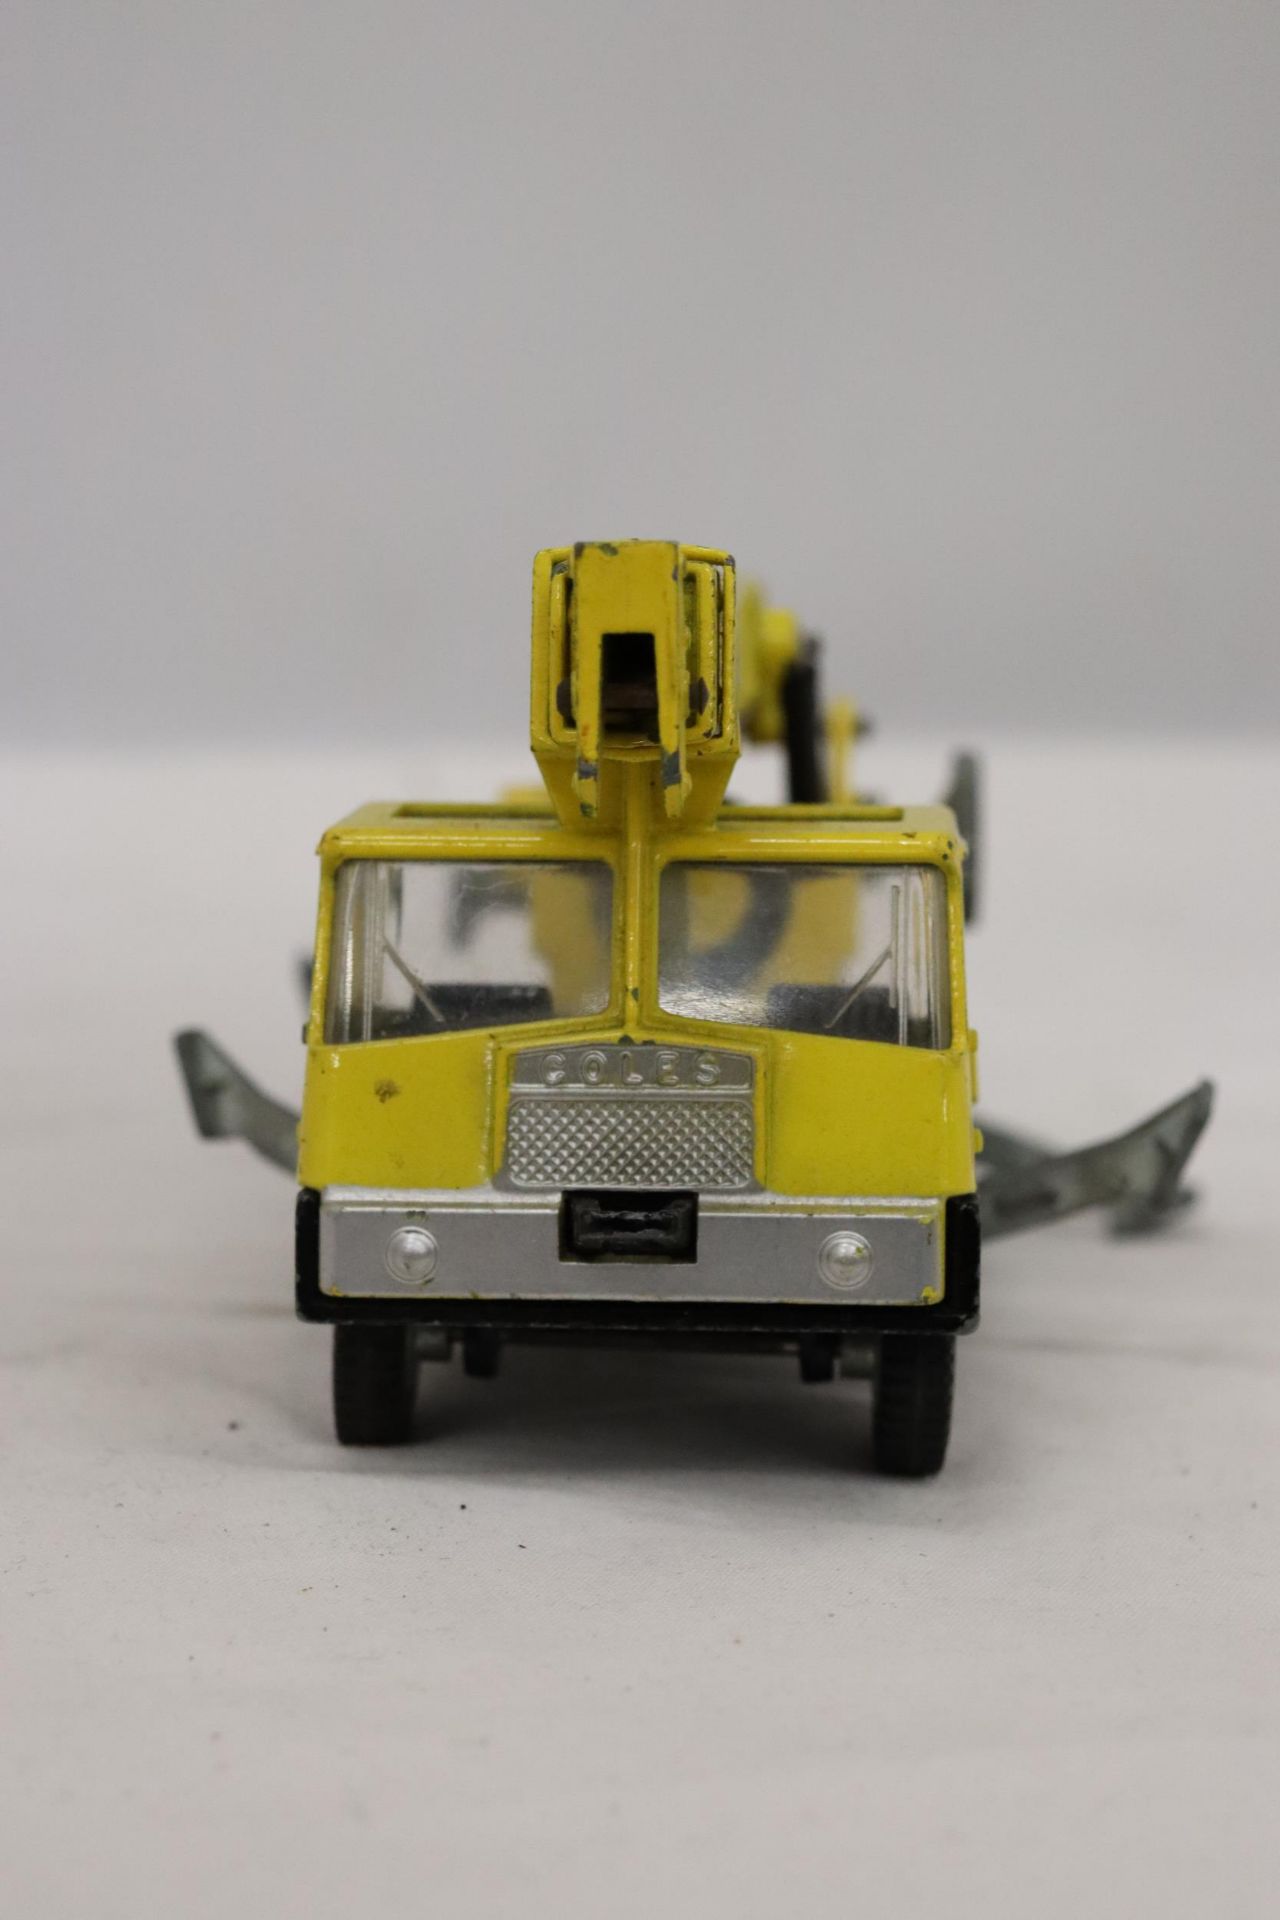 A COLES HYDRA TRUCK 150T MADE BY DINKY TOYS - Image 3 of 5